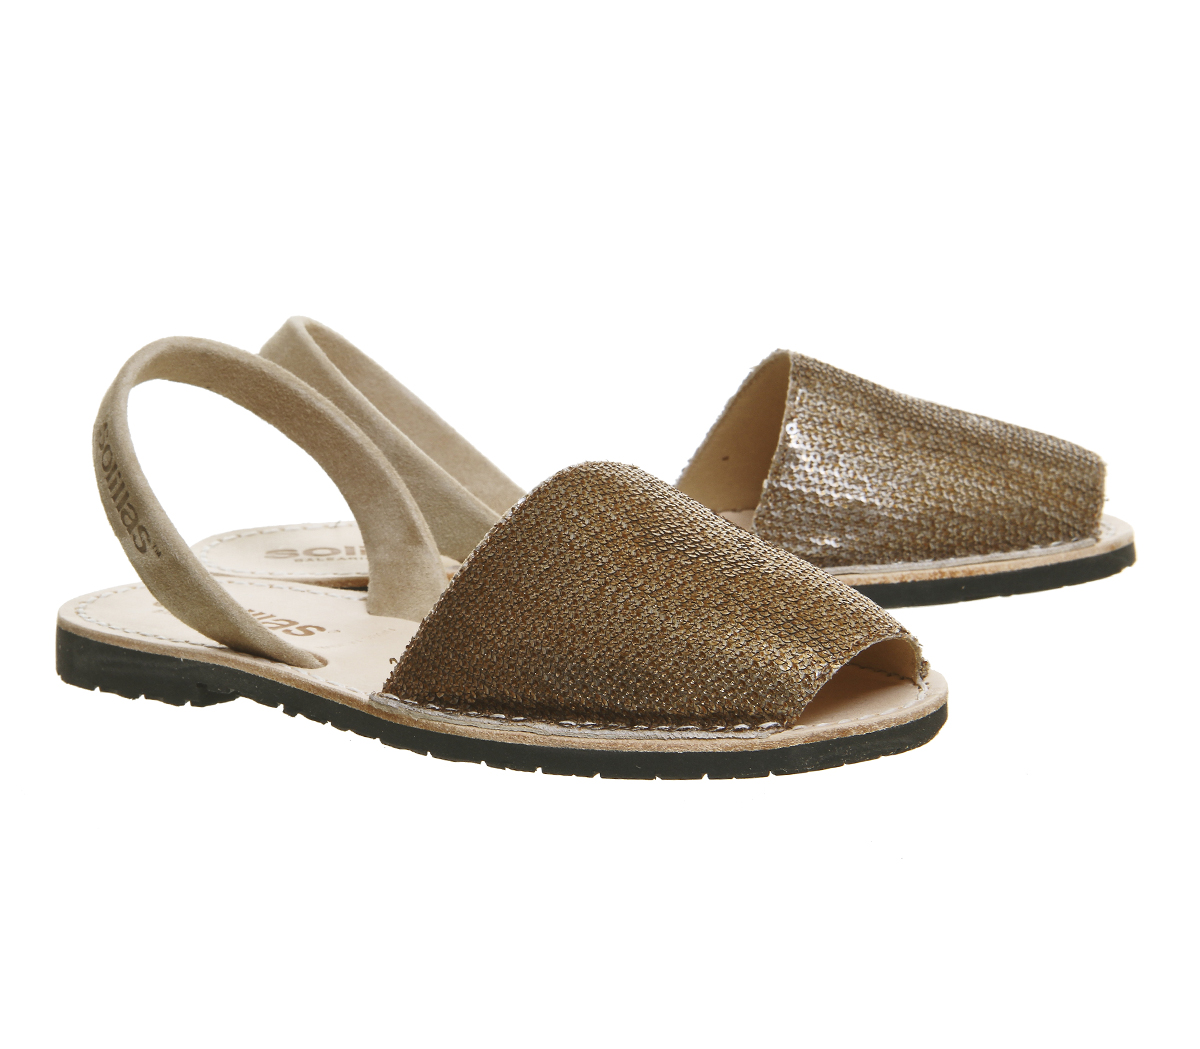 Solillas Solillas Sandals Dusted Gold Sequins Leather - Women’s Sandals